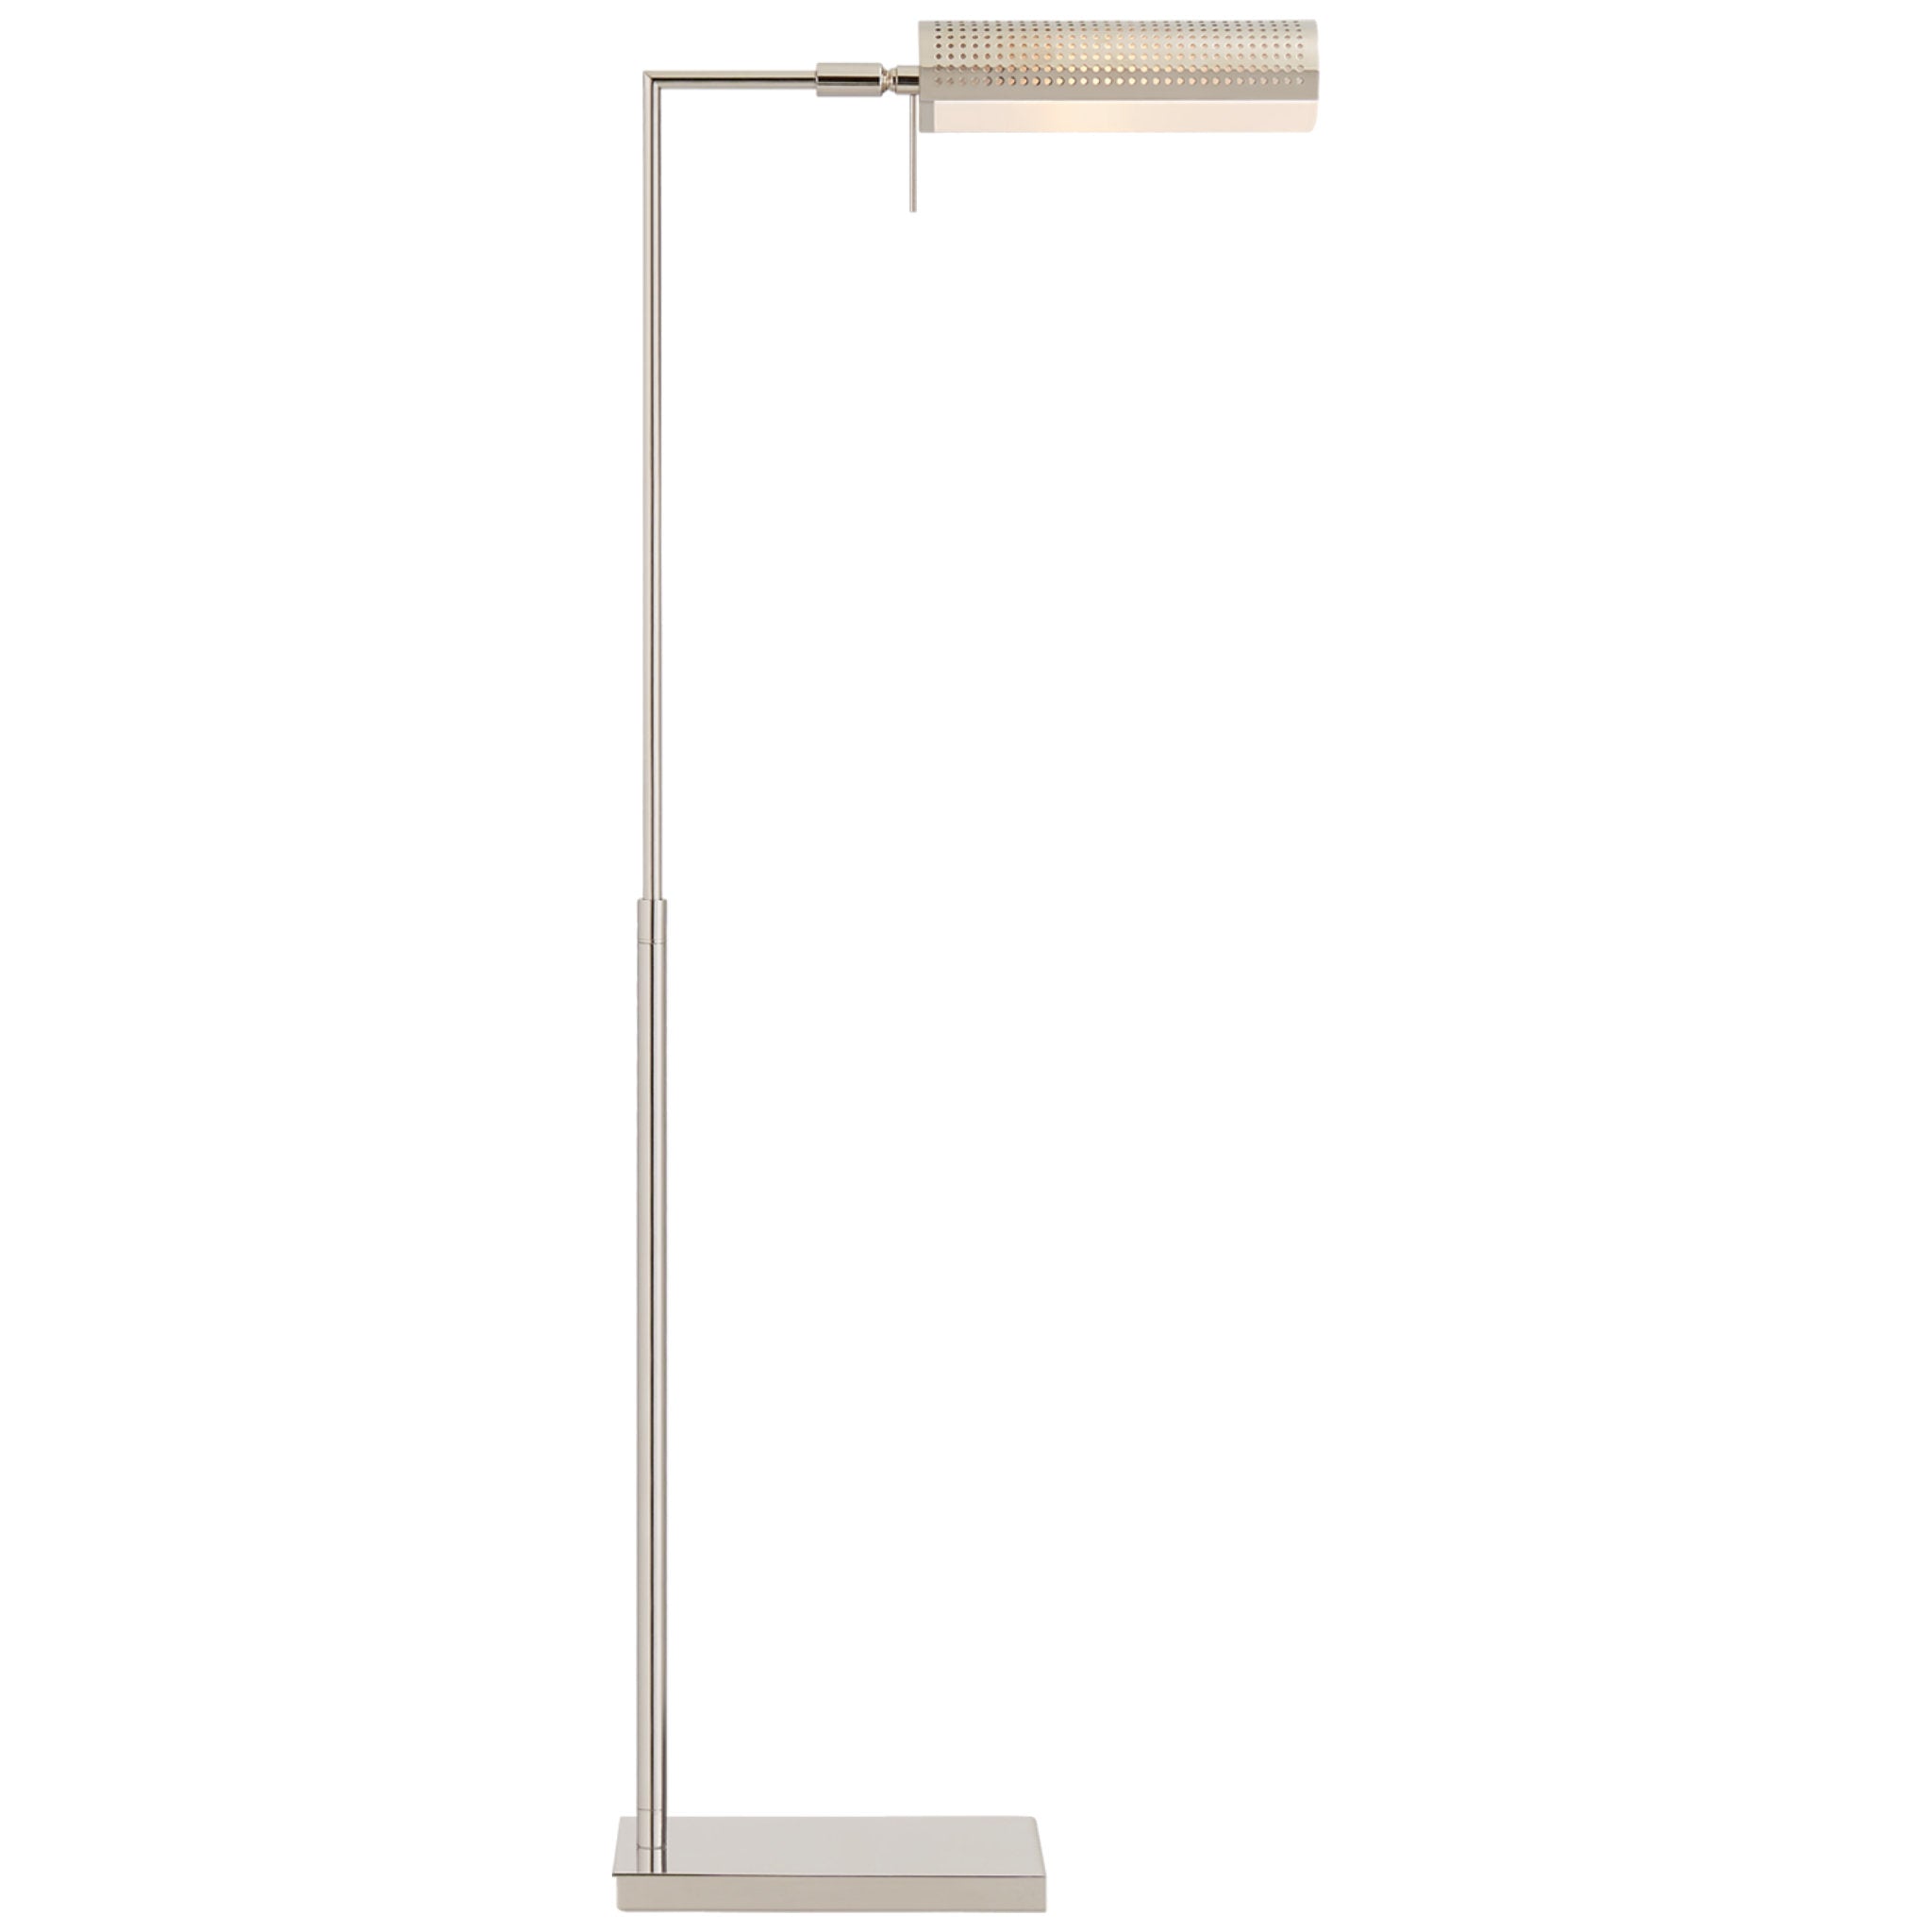 Kelly Wearstler Precision Pharmacy Floor Lamp in Polished Nickel with White Glass